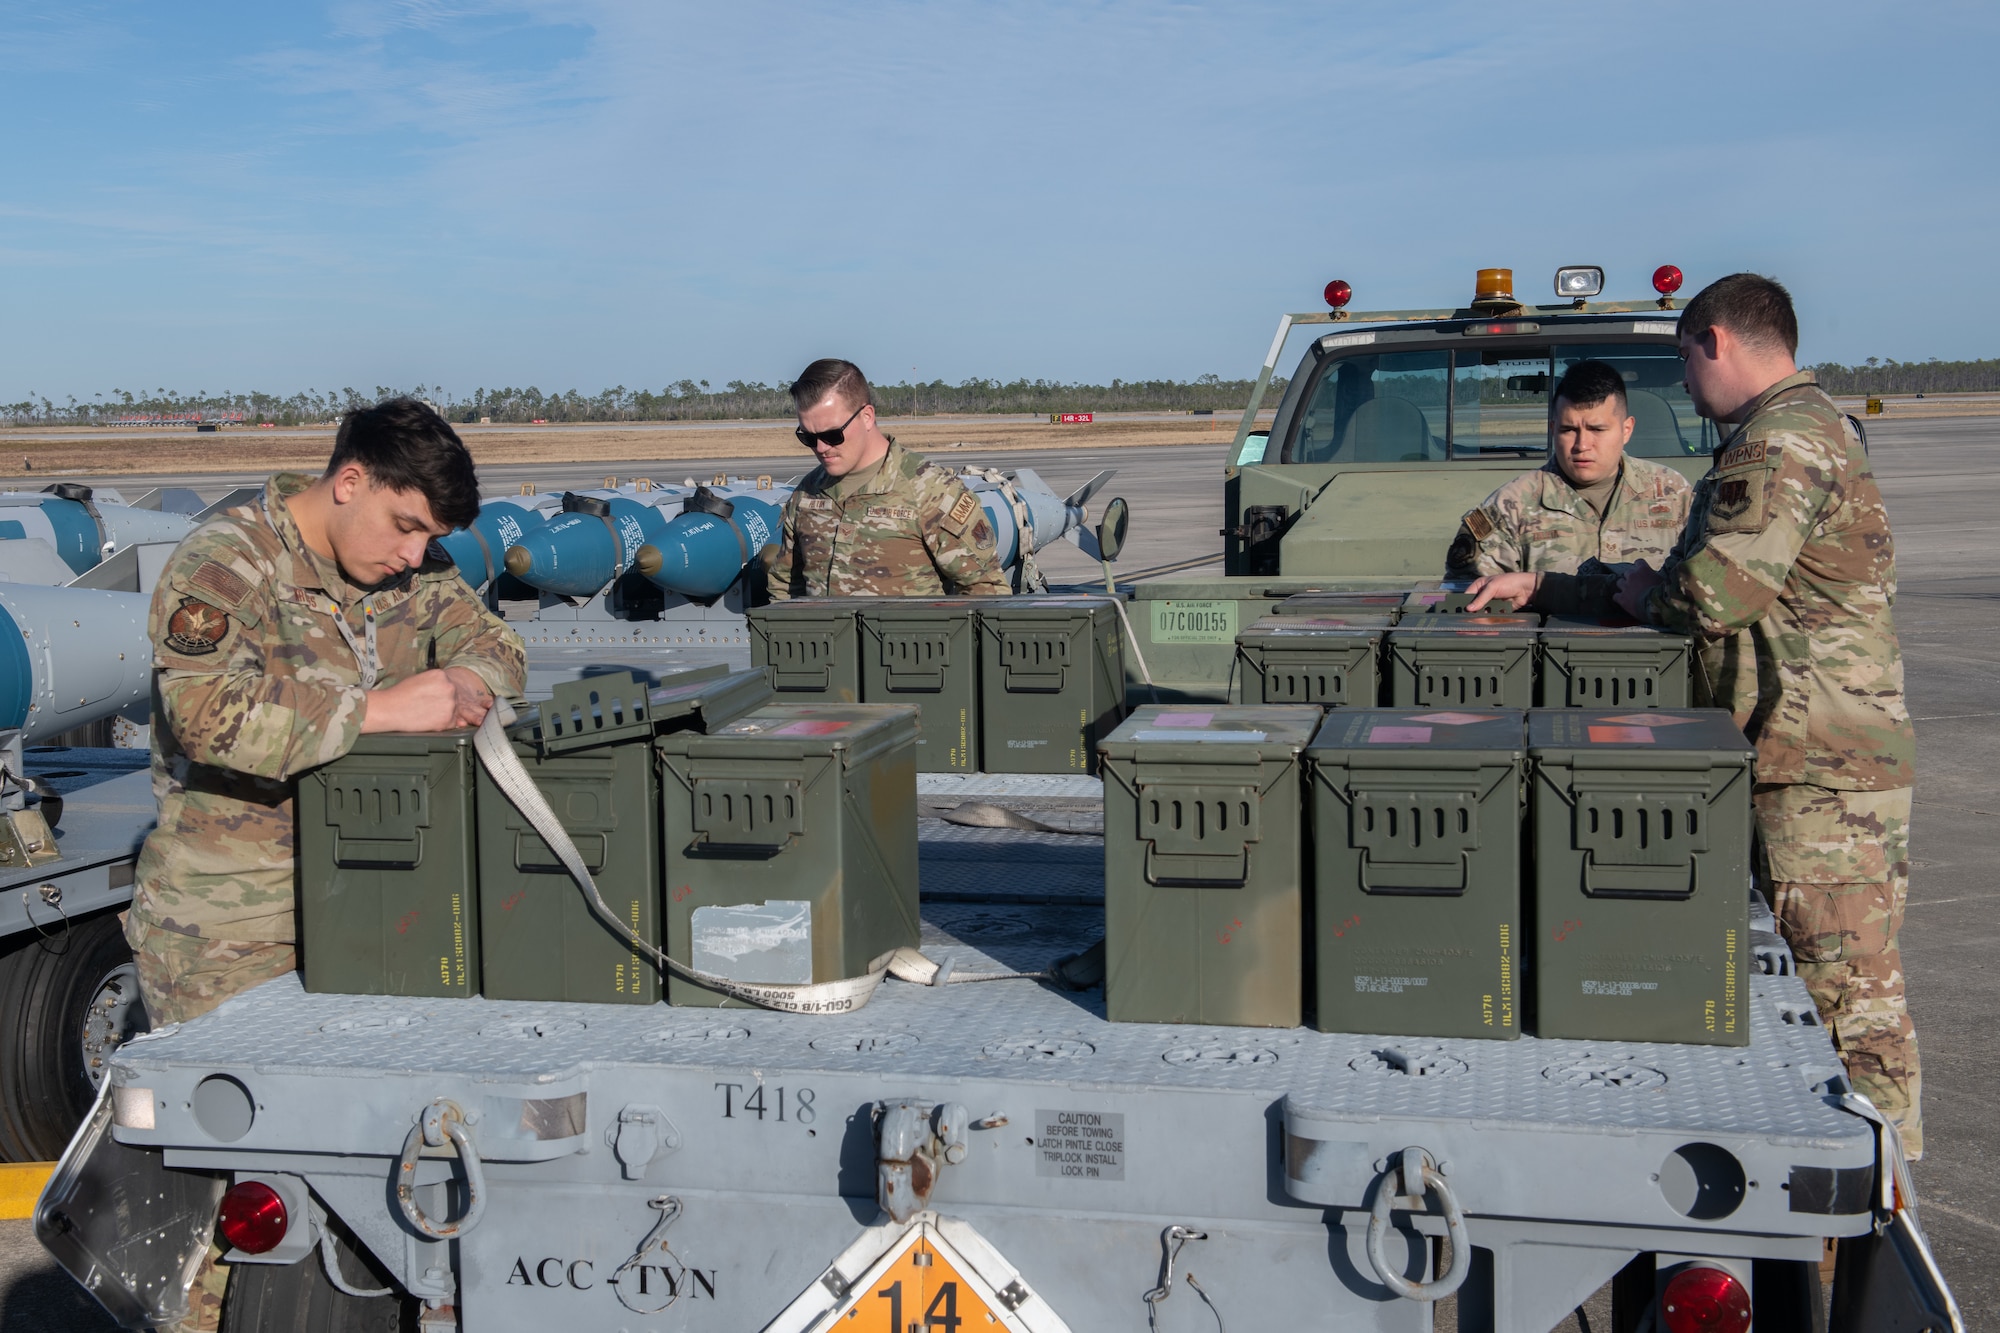 men move ammo cans